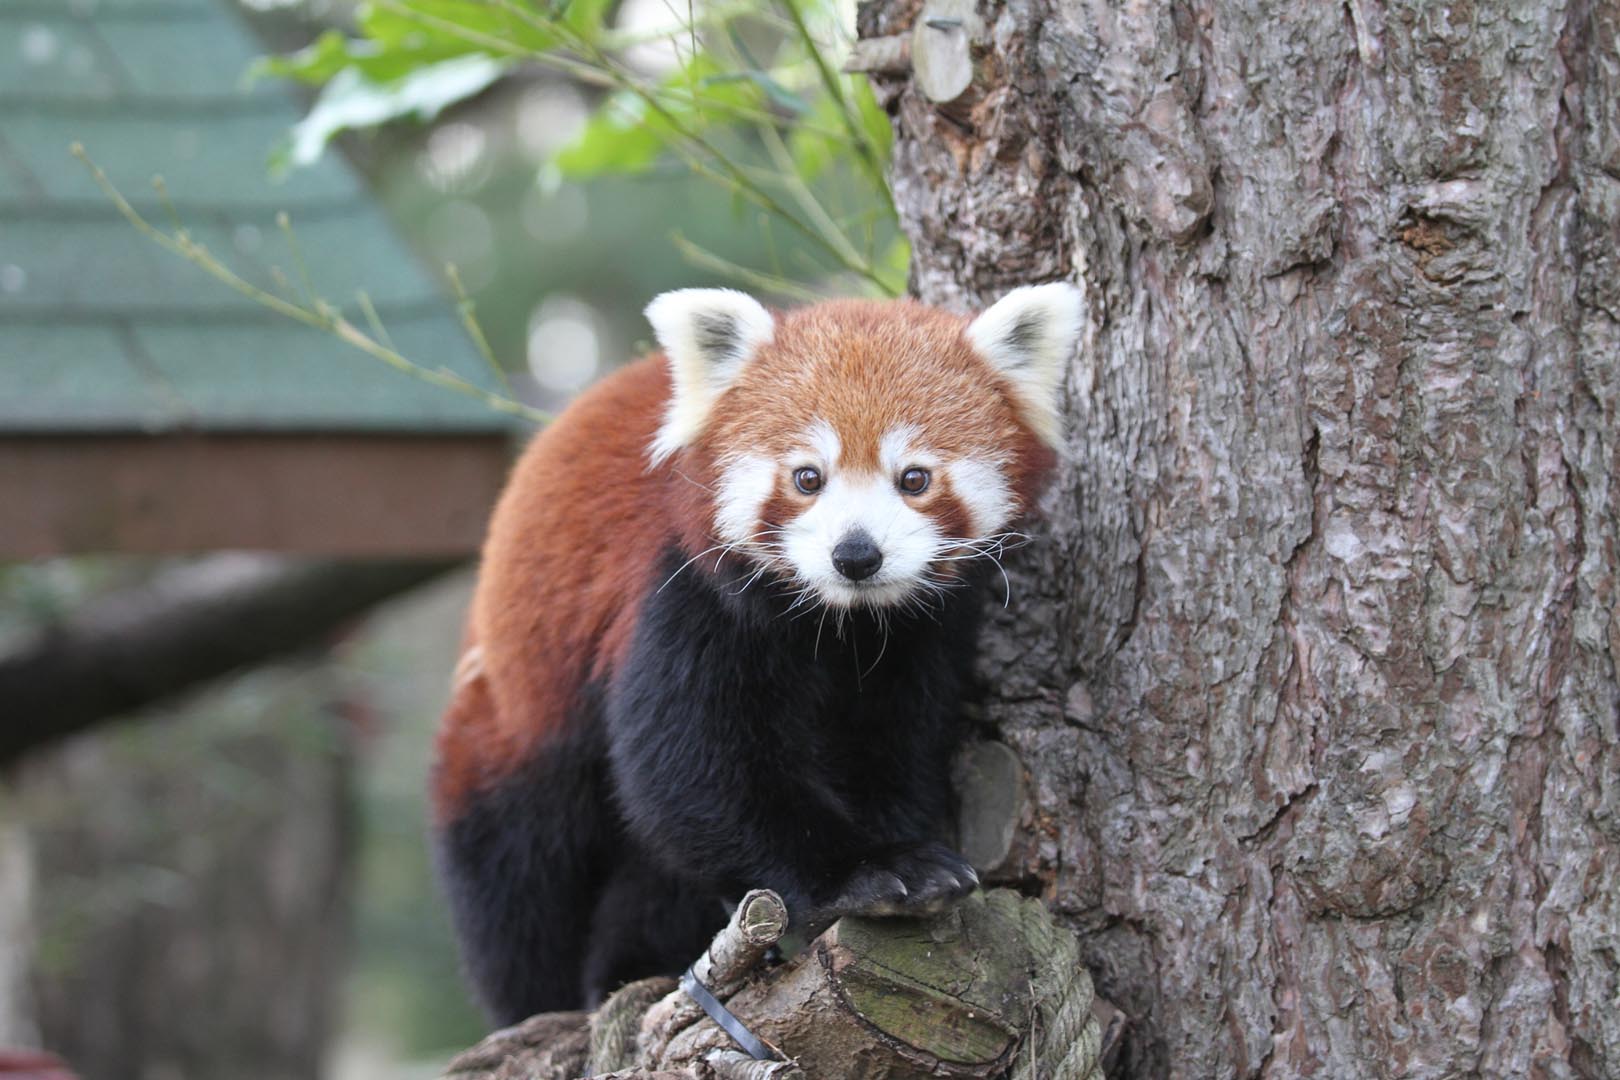 Red panda Ginger looking at the camera (eye-contact). IMAGE: Amy Middleton (2022)